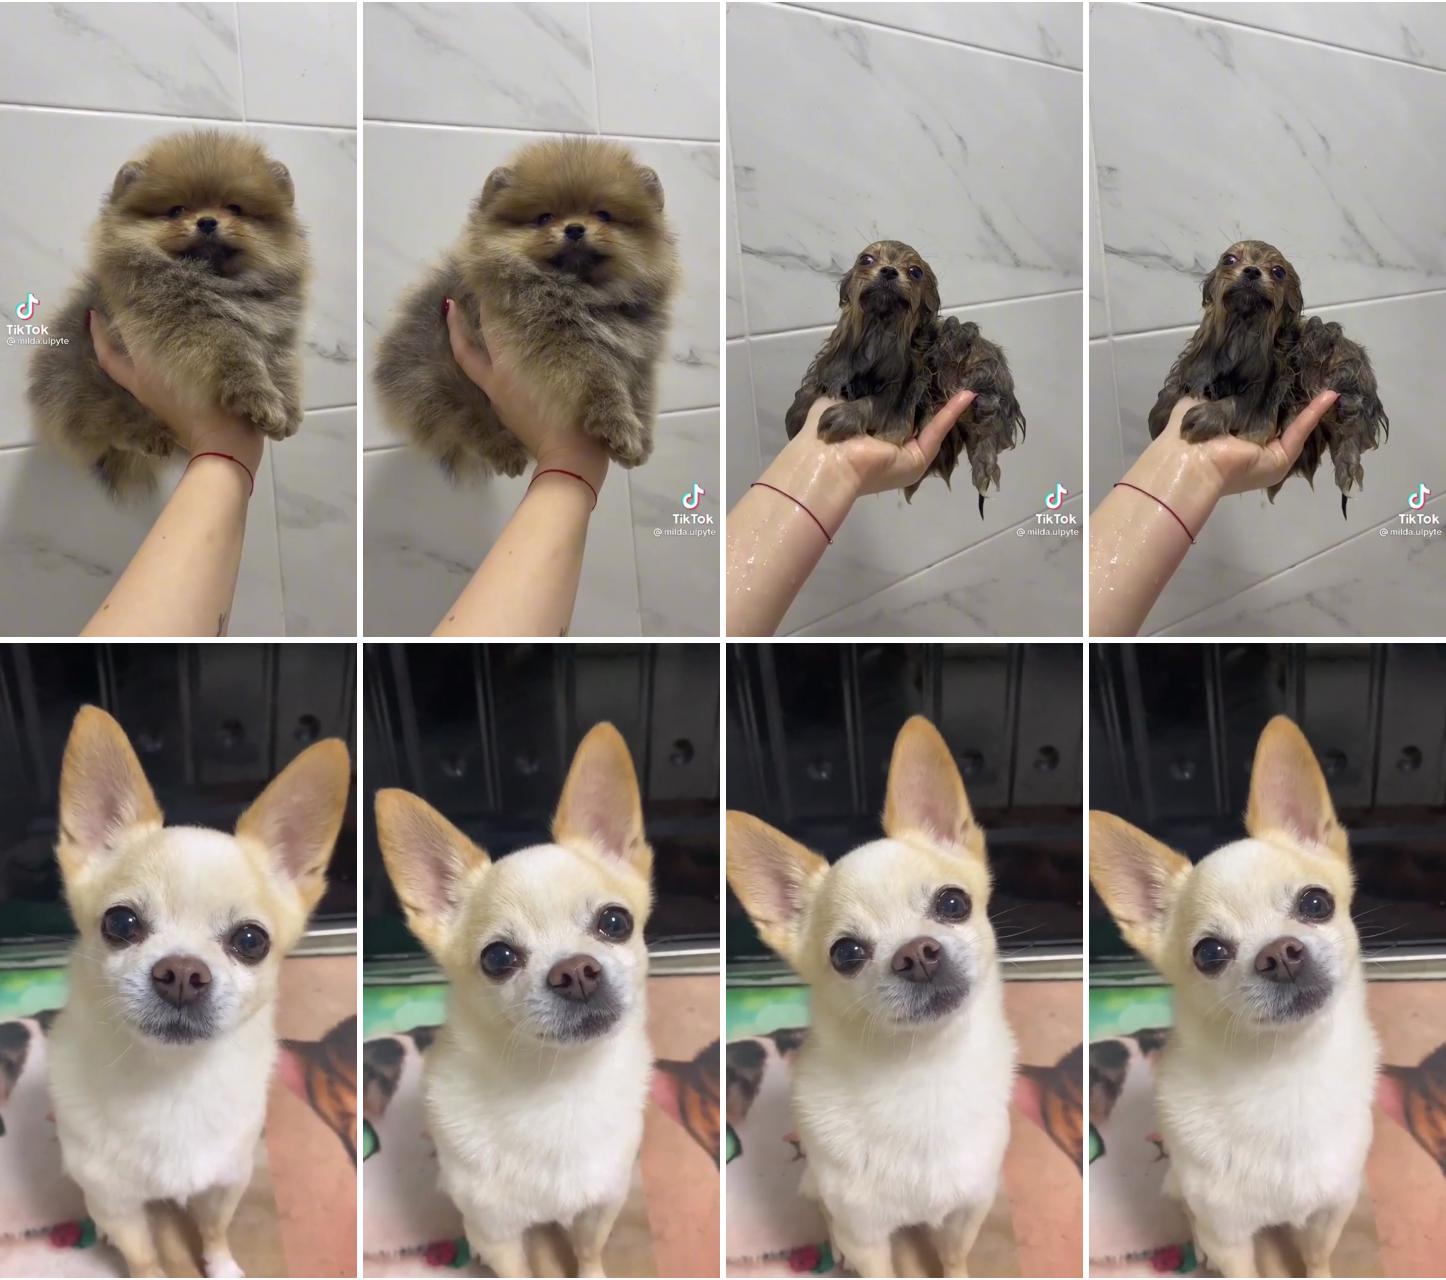 Pom transforms into baby seal, a de-floofed baby otter in the pom of your hand; so cute chihuahua